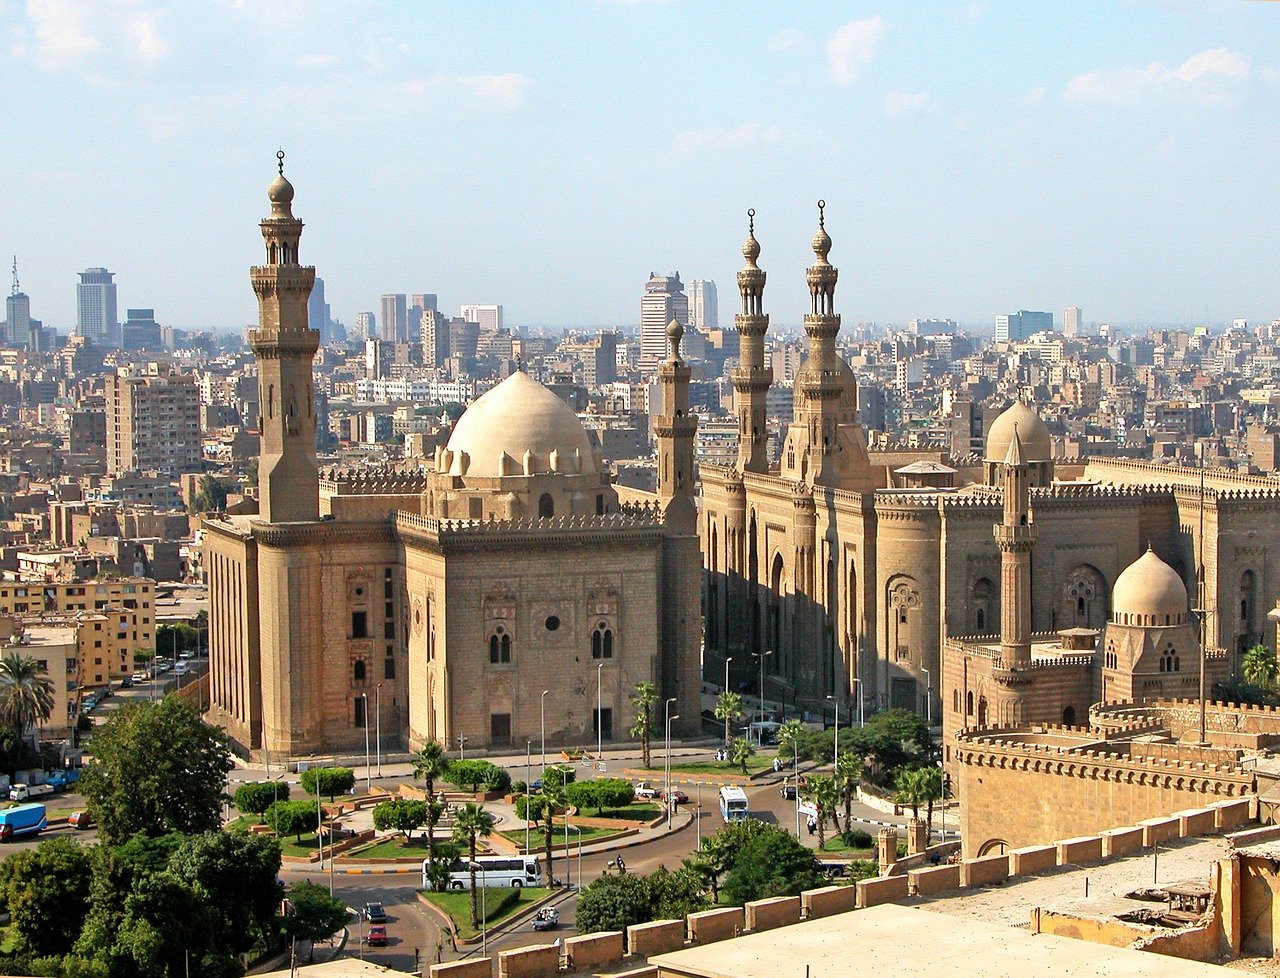 Cairo, Egypt - What to expect in Egypt